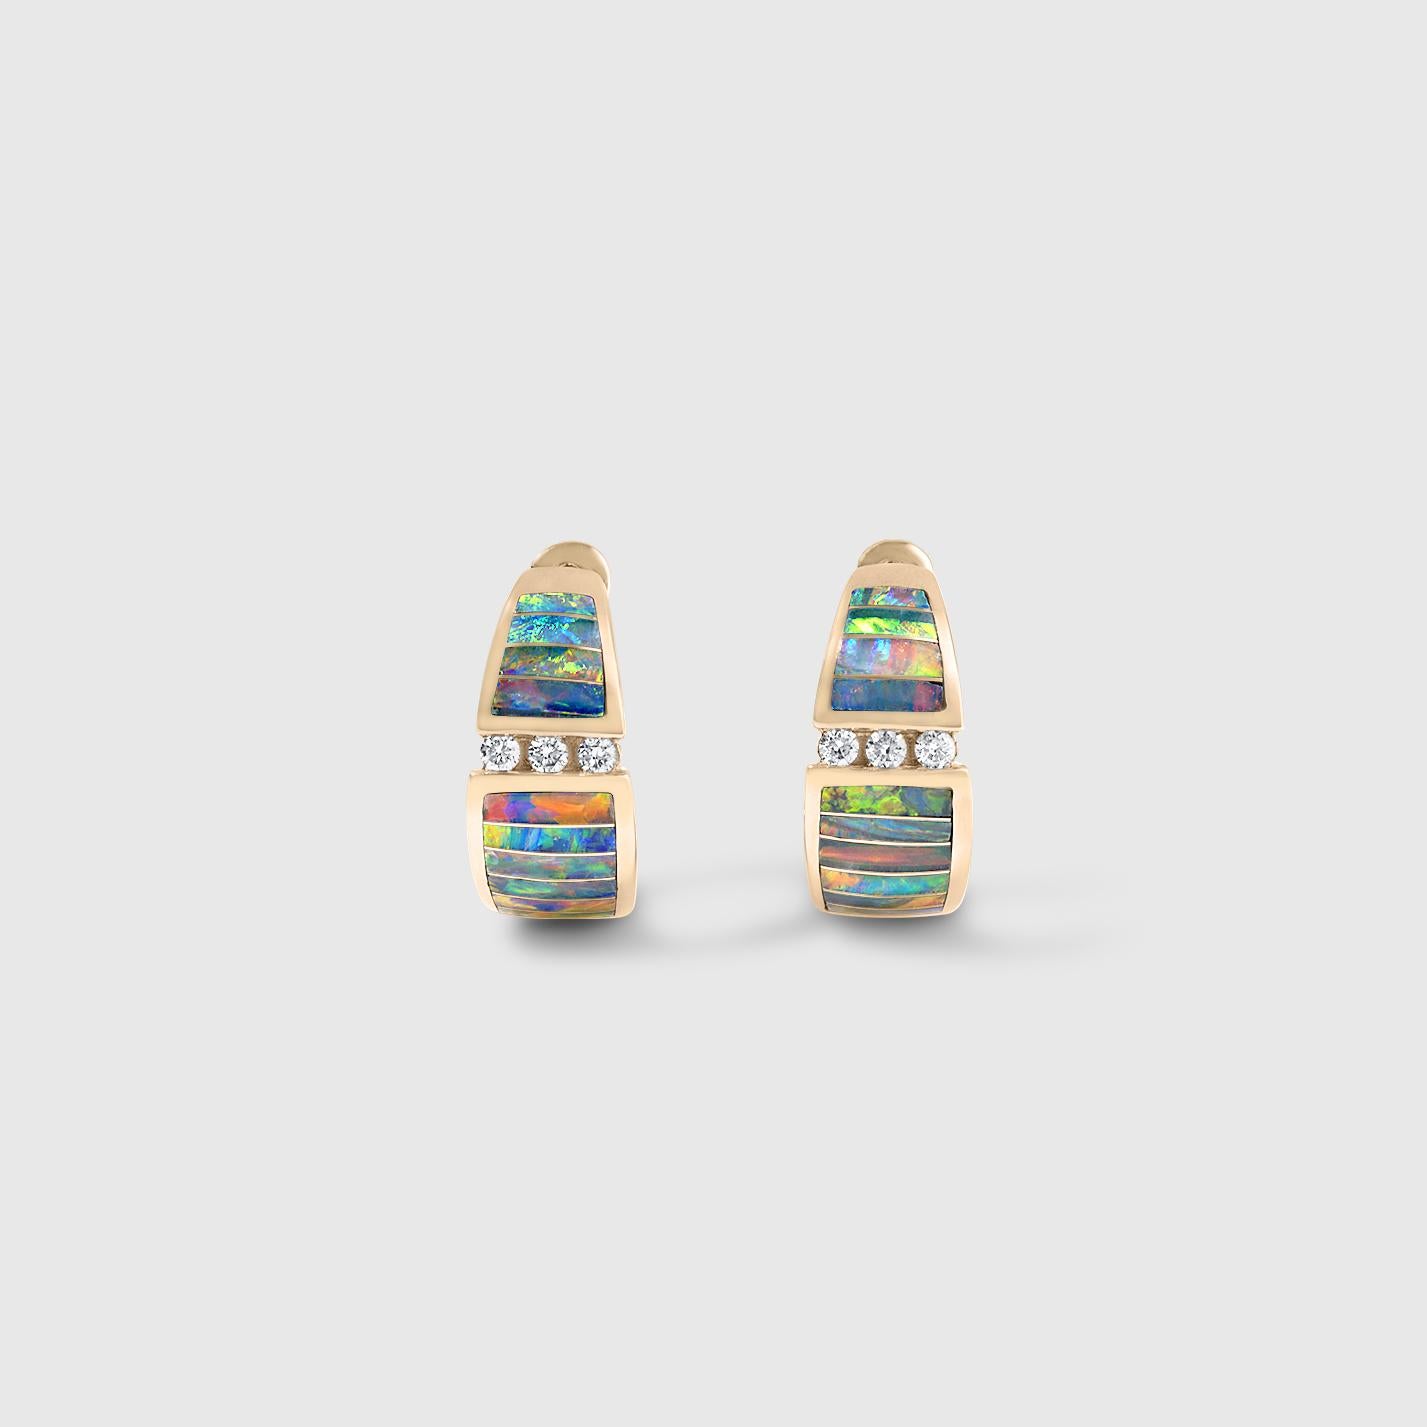 Huggie-Hoop, Hinged Post Earrings, 5 Star, Opal Inlay, with Diamond Detail, 14kt Gold, Diamonds - .09ct

All designs may be custom-ordered in many of Kabana’s stones, including: sleeping beauty turquoise, turquoise, four-star opal,